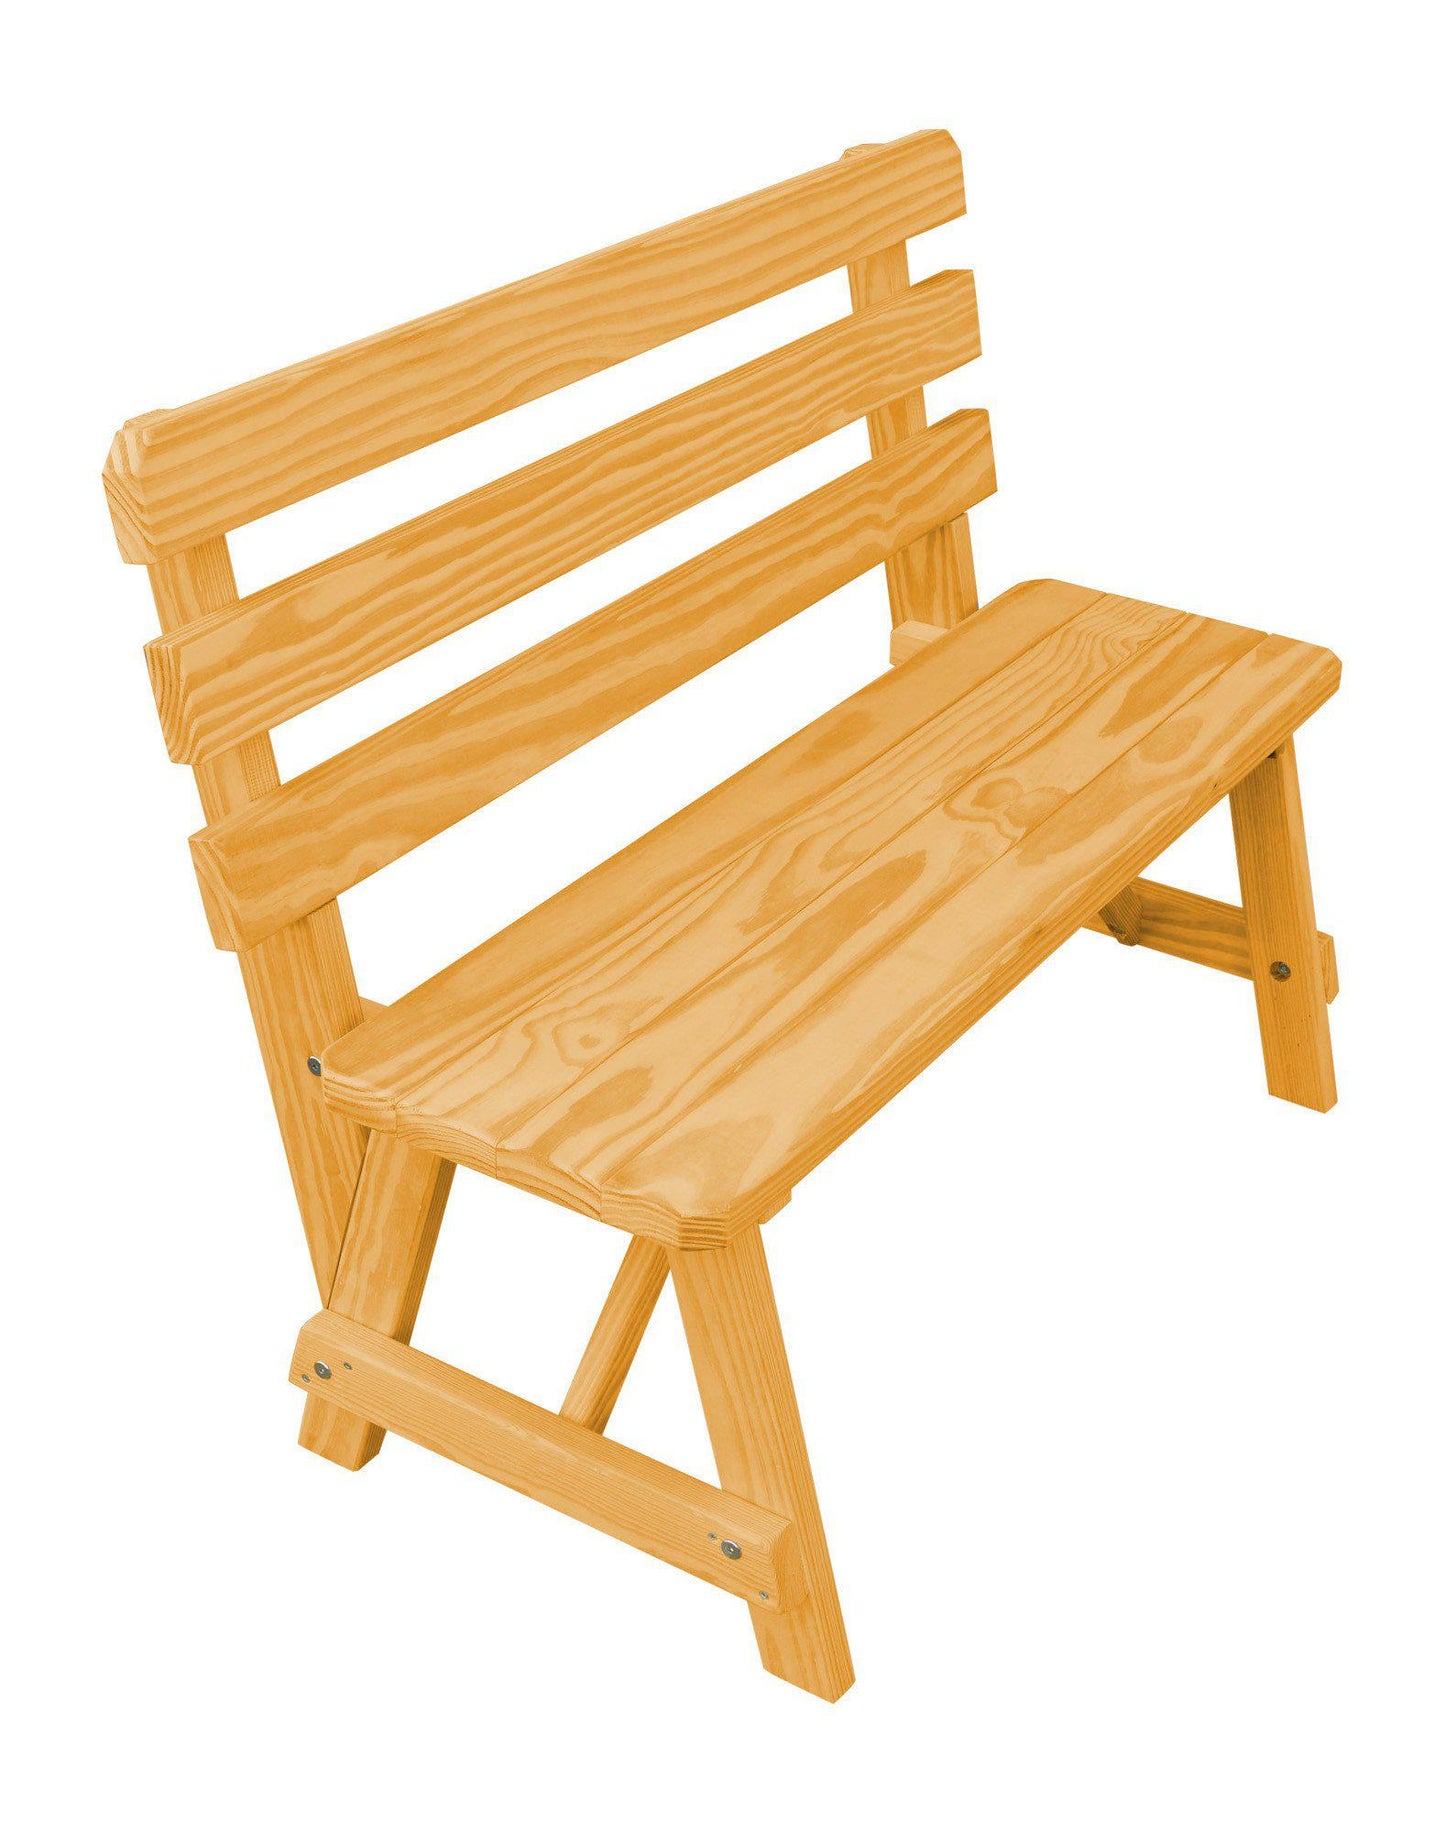 A&L Furniture Co. Yellow Pine 55" Traditional Backed Bench Only - LEAD TIME TO SHIP 10 BUSINESS DAYS